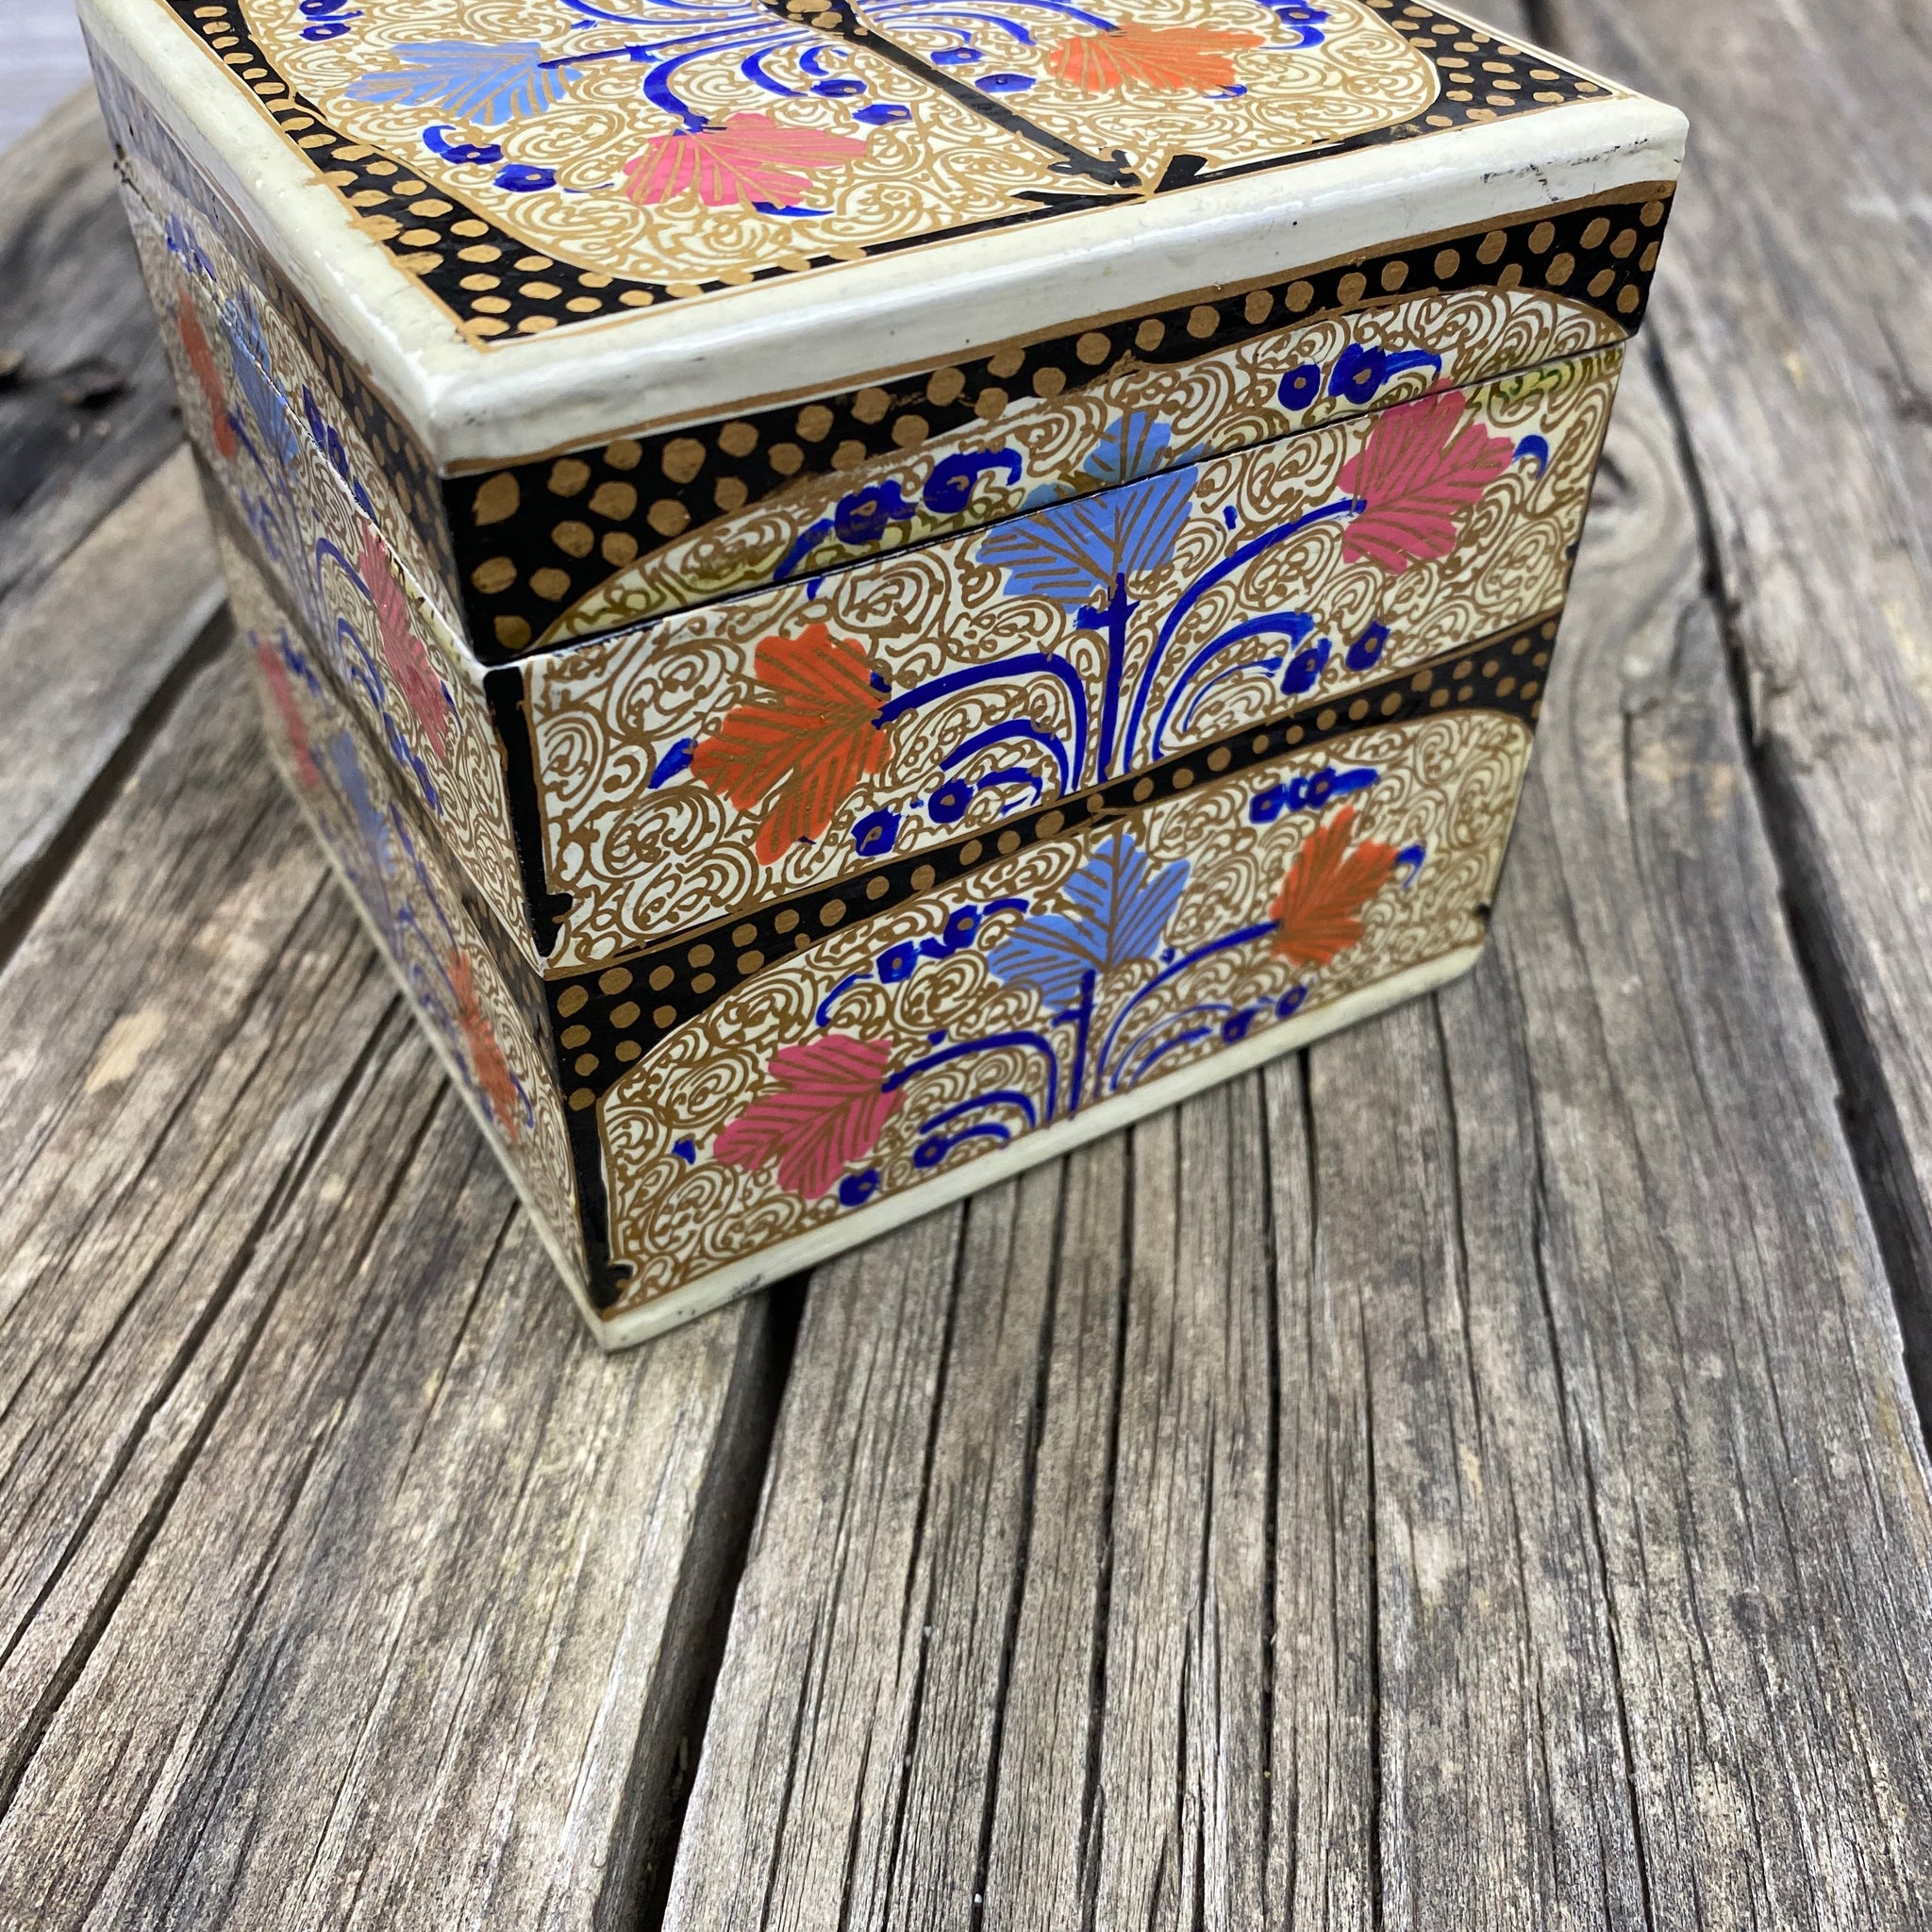 Fair Trade Ethical Hand Painted Square Box